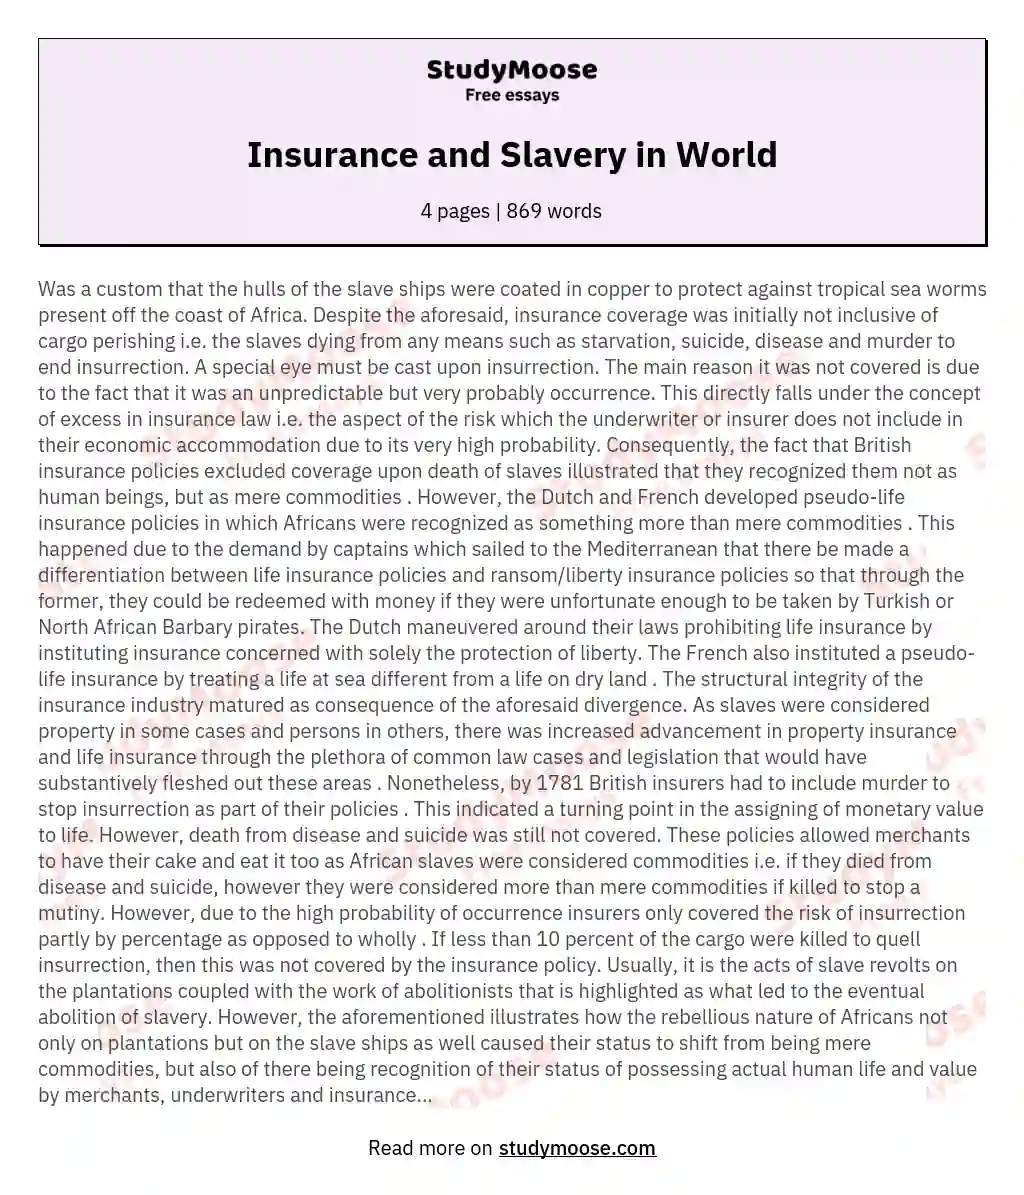 Insurance and Slavery in World essay